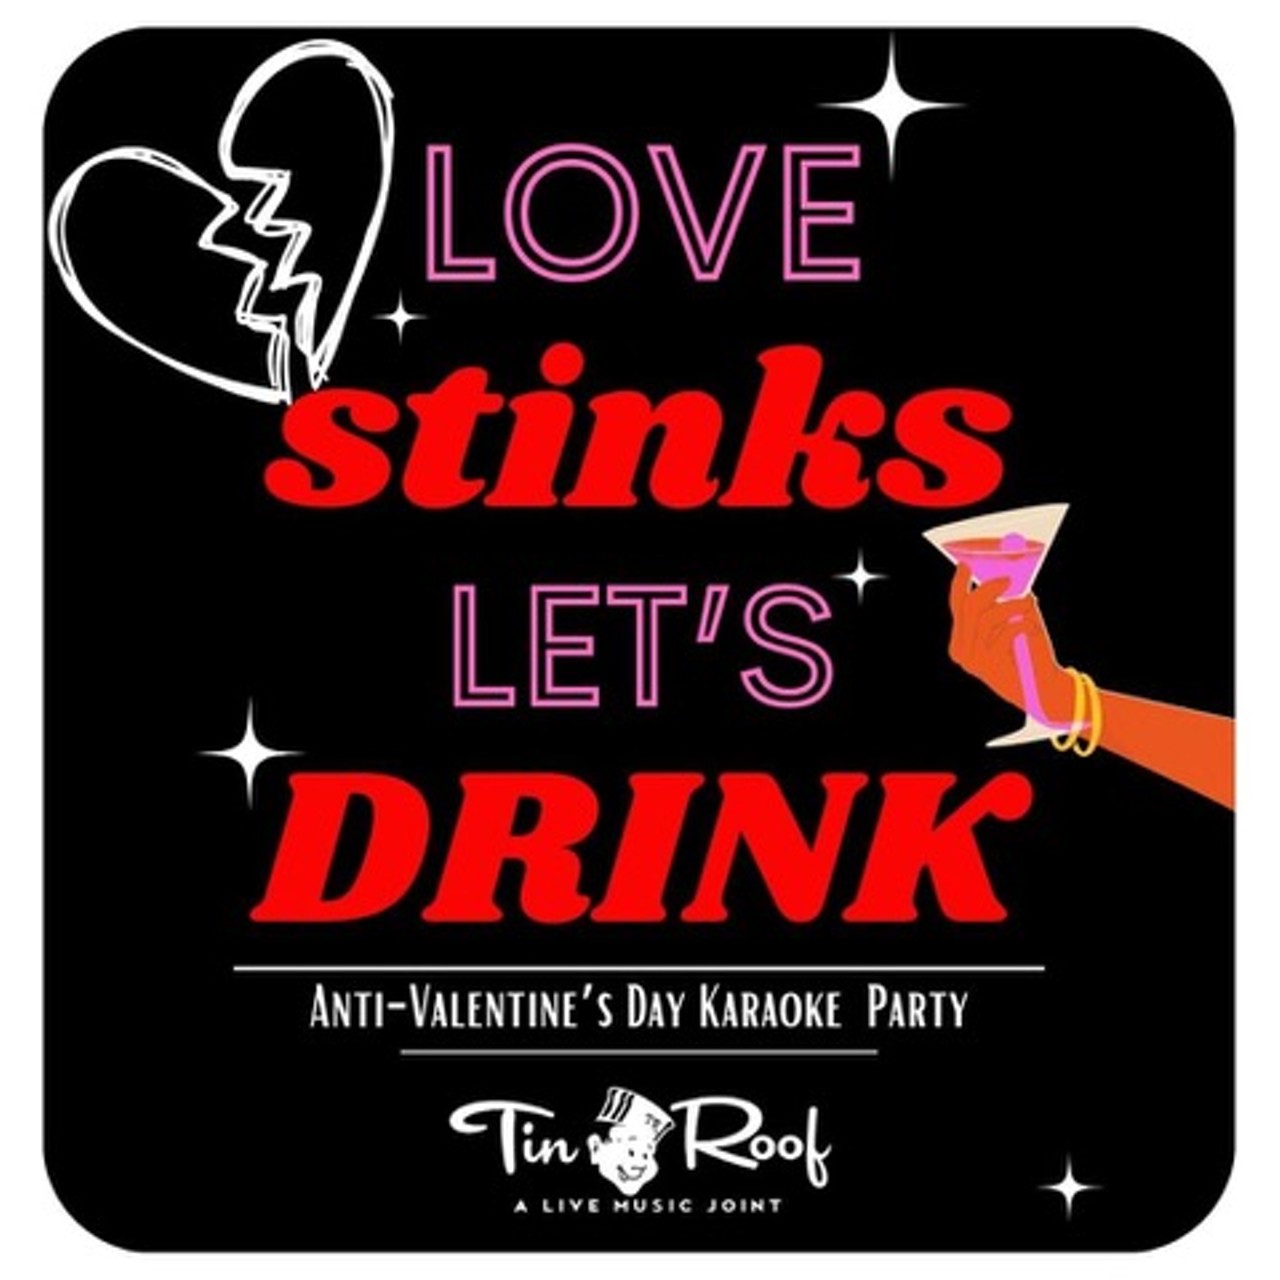 Tin Roof&rsquo;s Anti-Valentine&rsquo;s Day Dance Party
Follow Tin Roof&rsquo;s motto &ldquo;Valentine&rsquo;s Day stinks, let&rsquo;s drink.&rdquo; Tin Roof (1000 Clark Avenue) will be hosting a paint and sip from 7 to 10 p.m. followed by a night of anti-Valentine&rsquo;s Day karaoke and dance party from 10 p.m. to 2 a.m. The names of the drink specials should give a good clue toward the mood here; they include Thank U, Next Martini, Ex&rsquo;s and Ohs and ABCDE&hellip; FU.